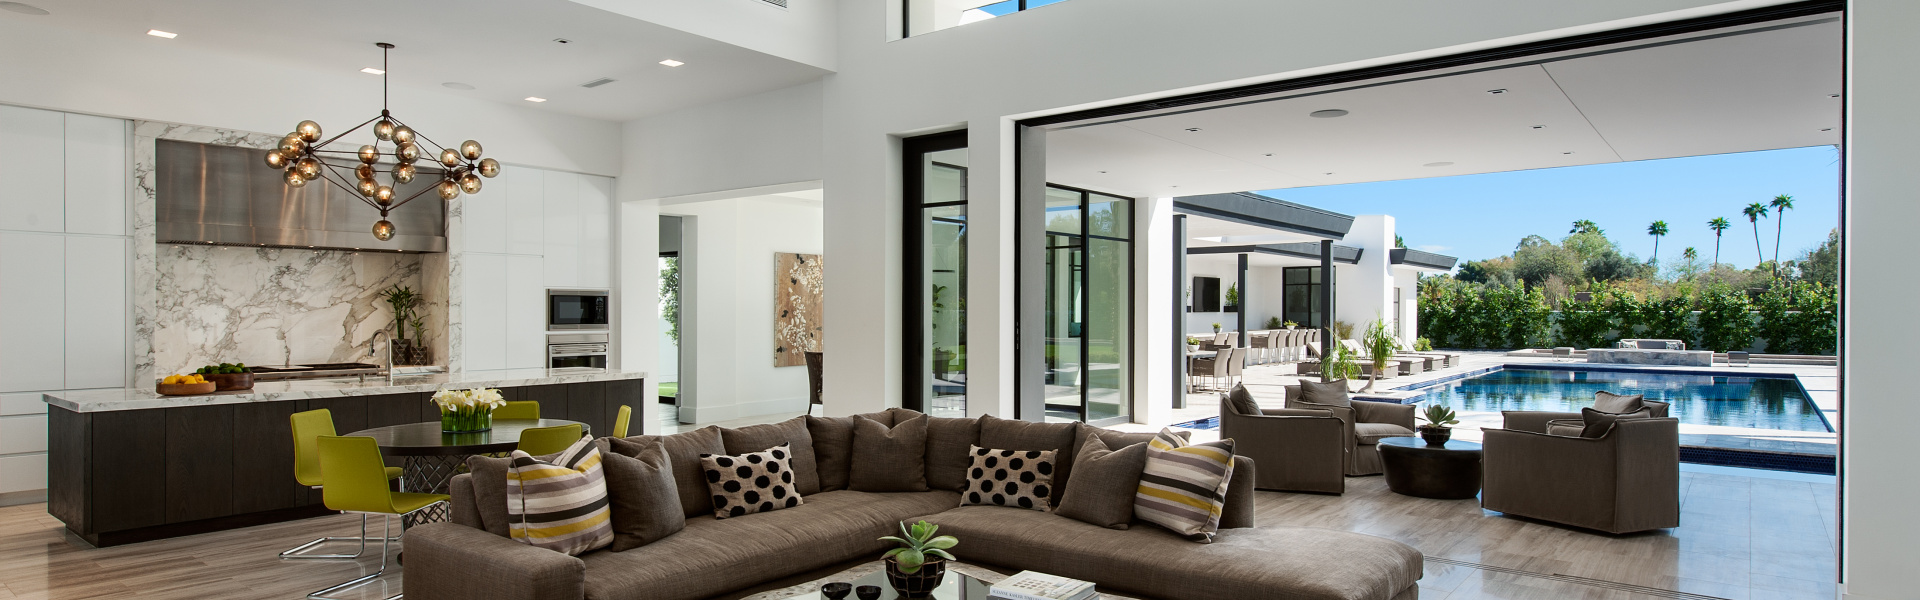 Smart home installation by Cyber Technology Group for Paradise Valley